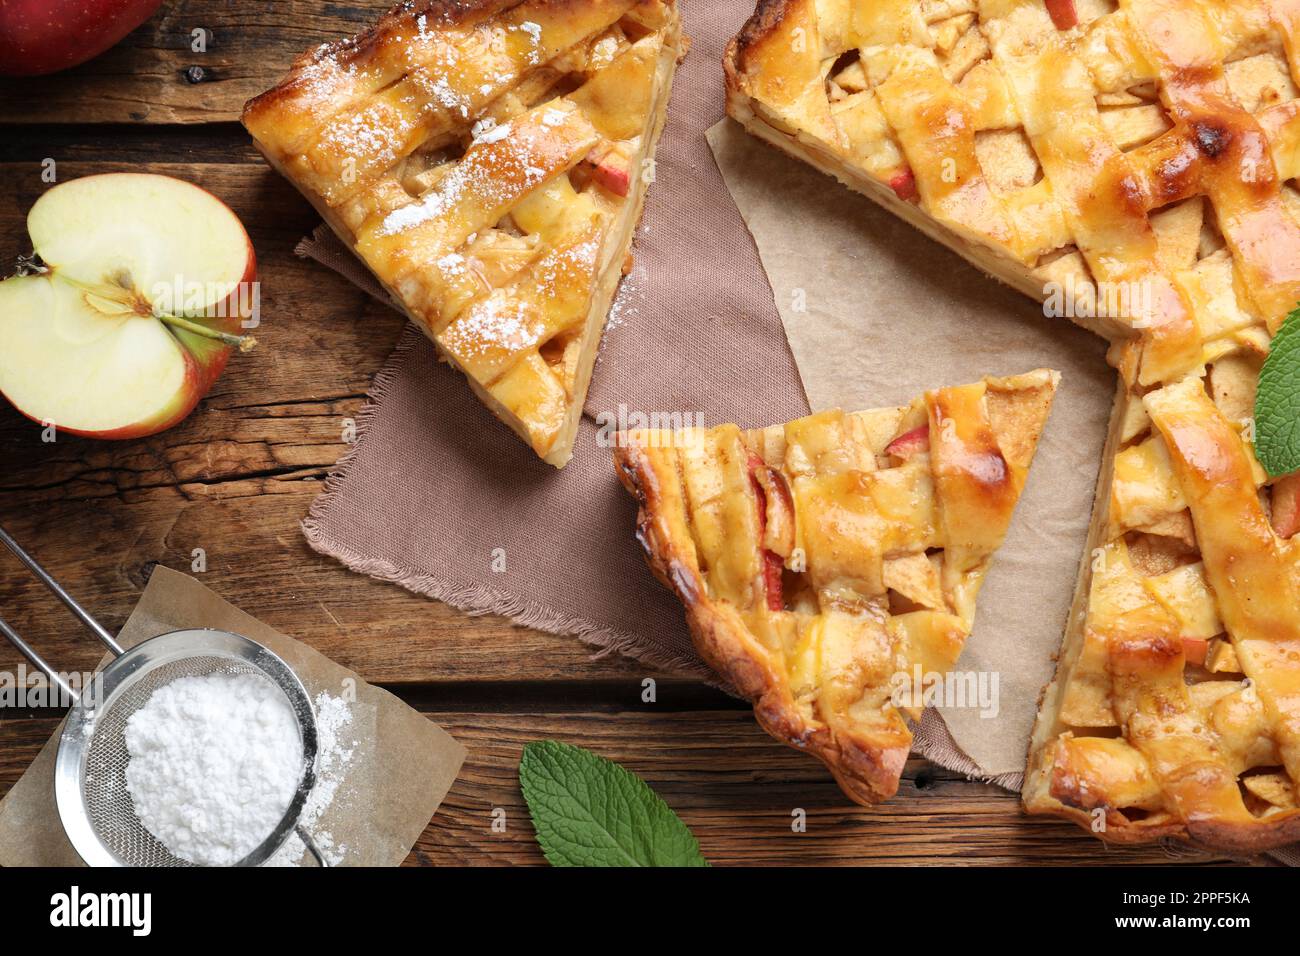 Traditional apple pie and ingredients on wooden table, flat lay Stock Photo